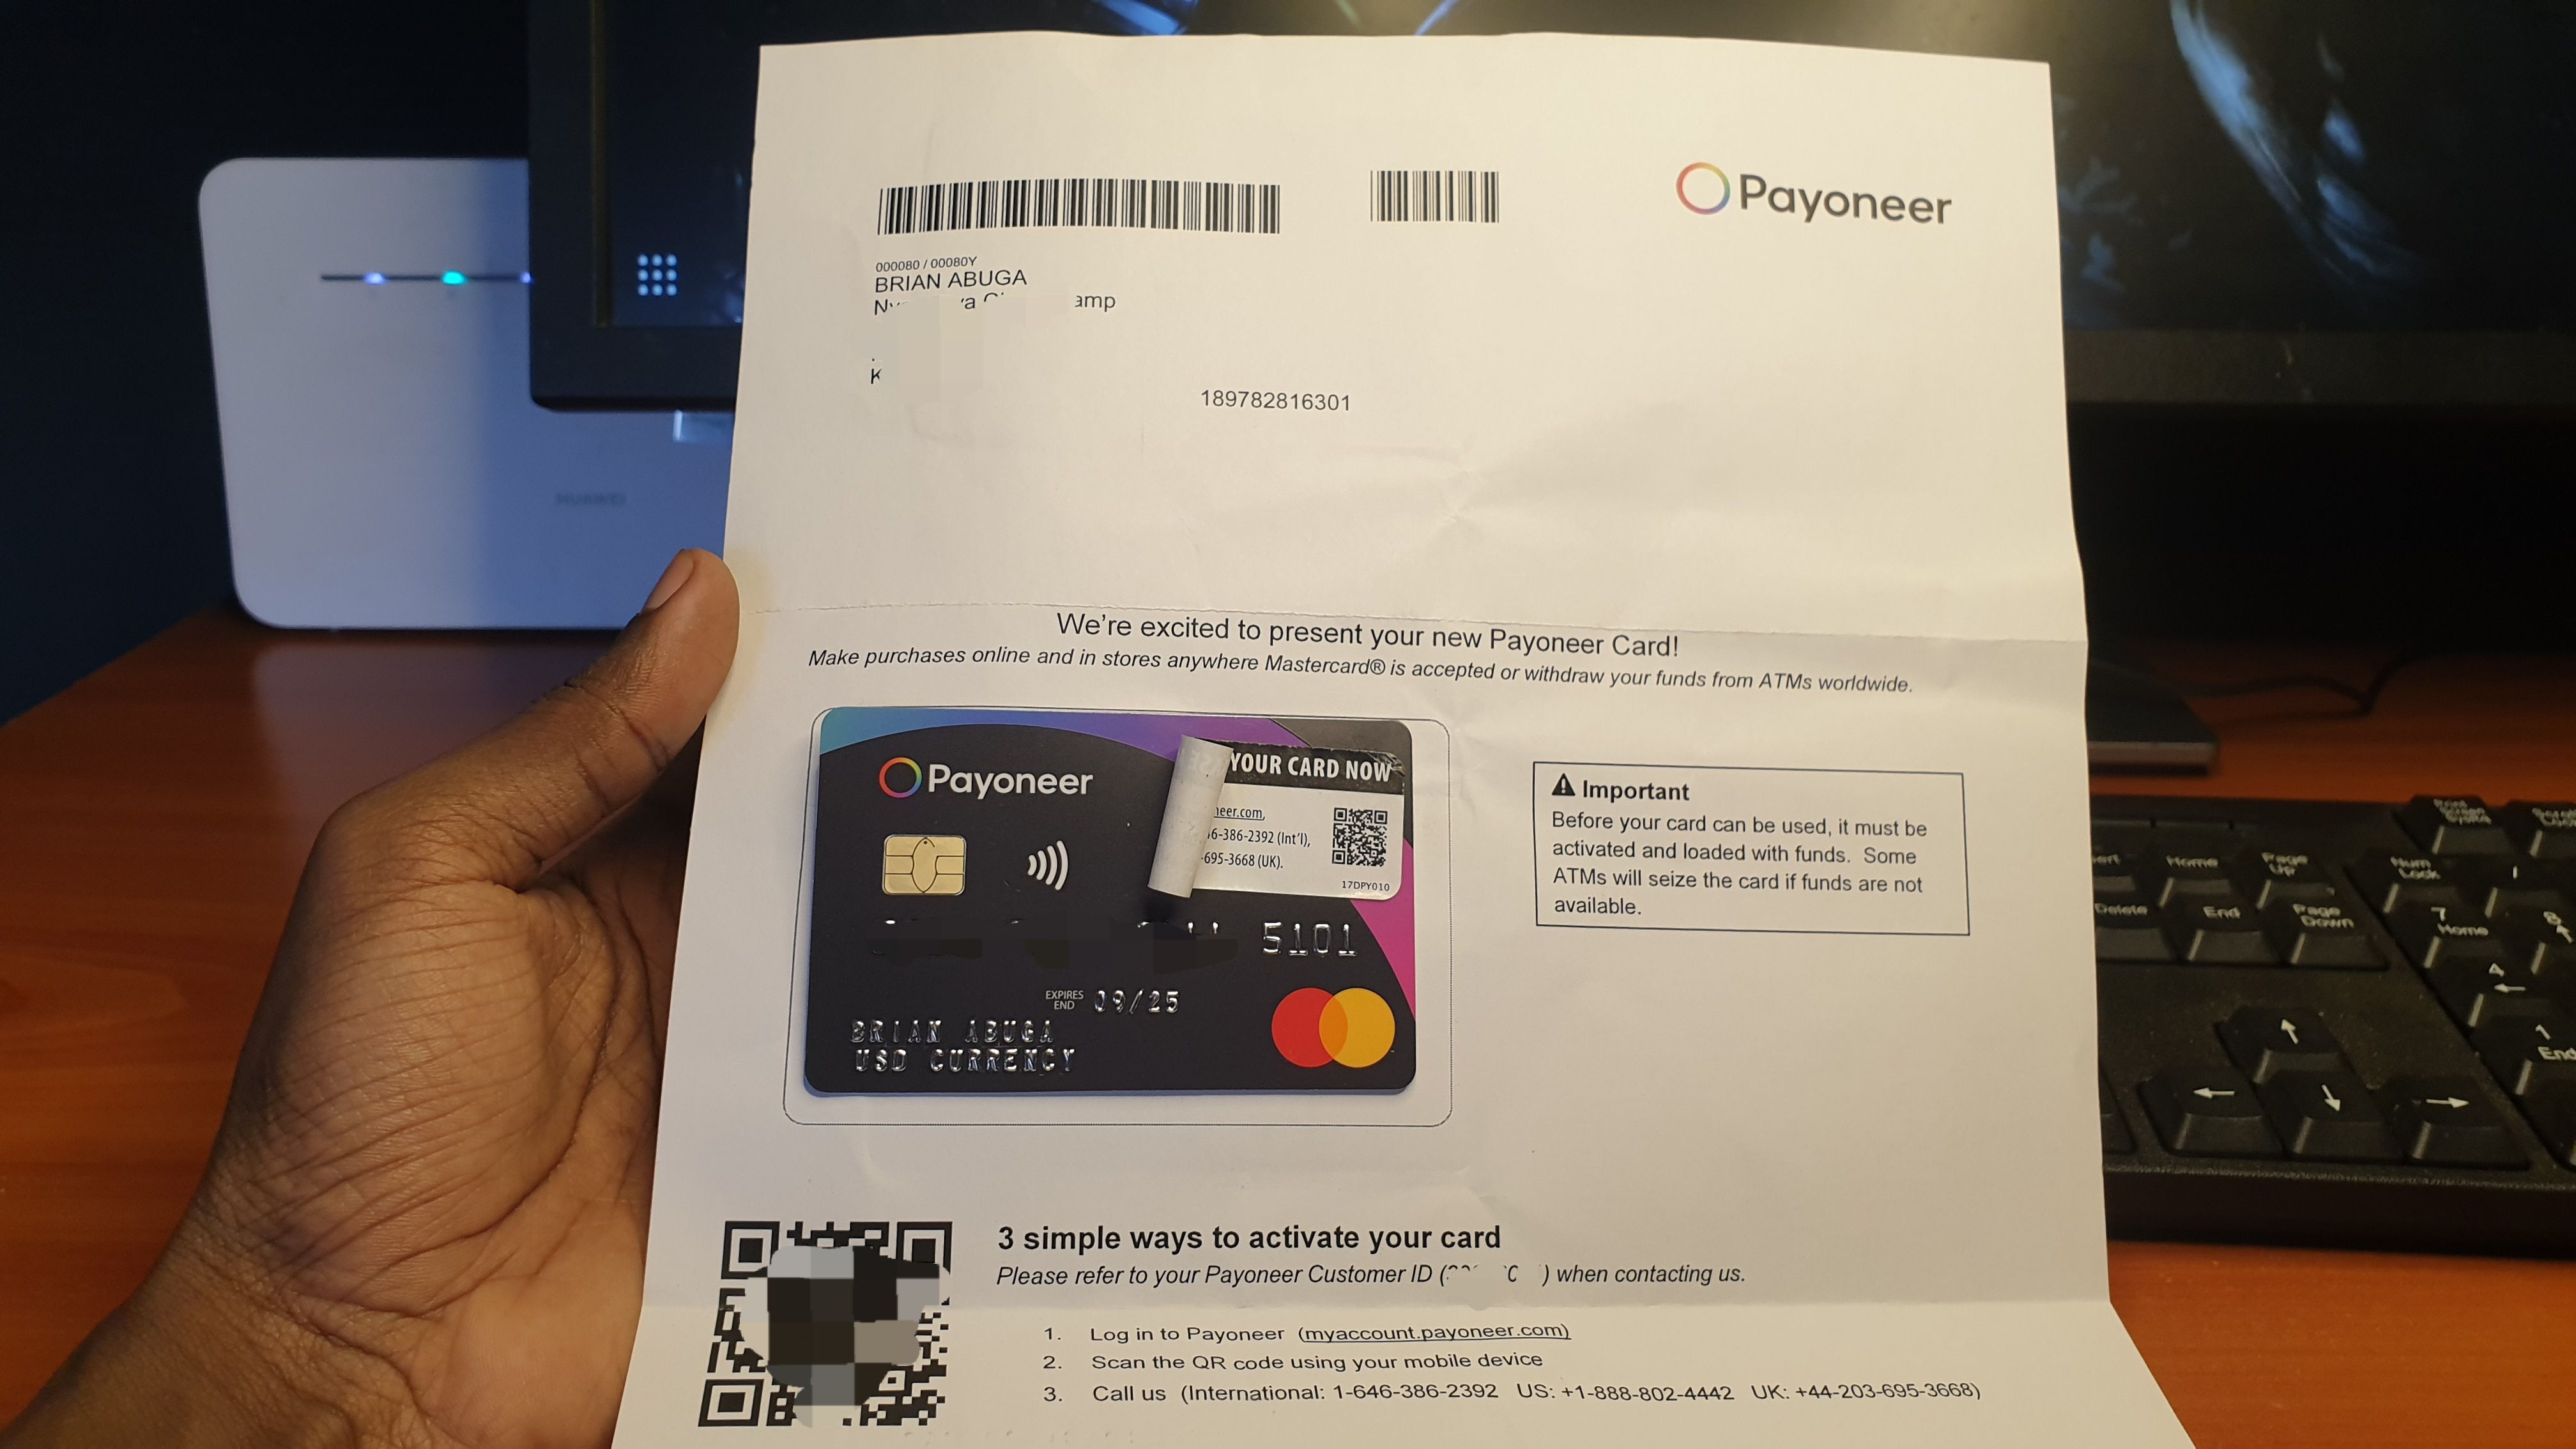 Payoneer MasterCard physical mail delivery